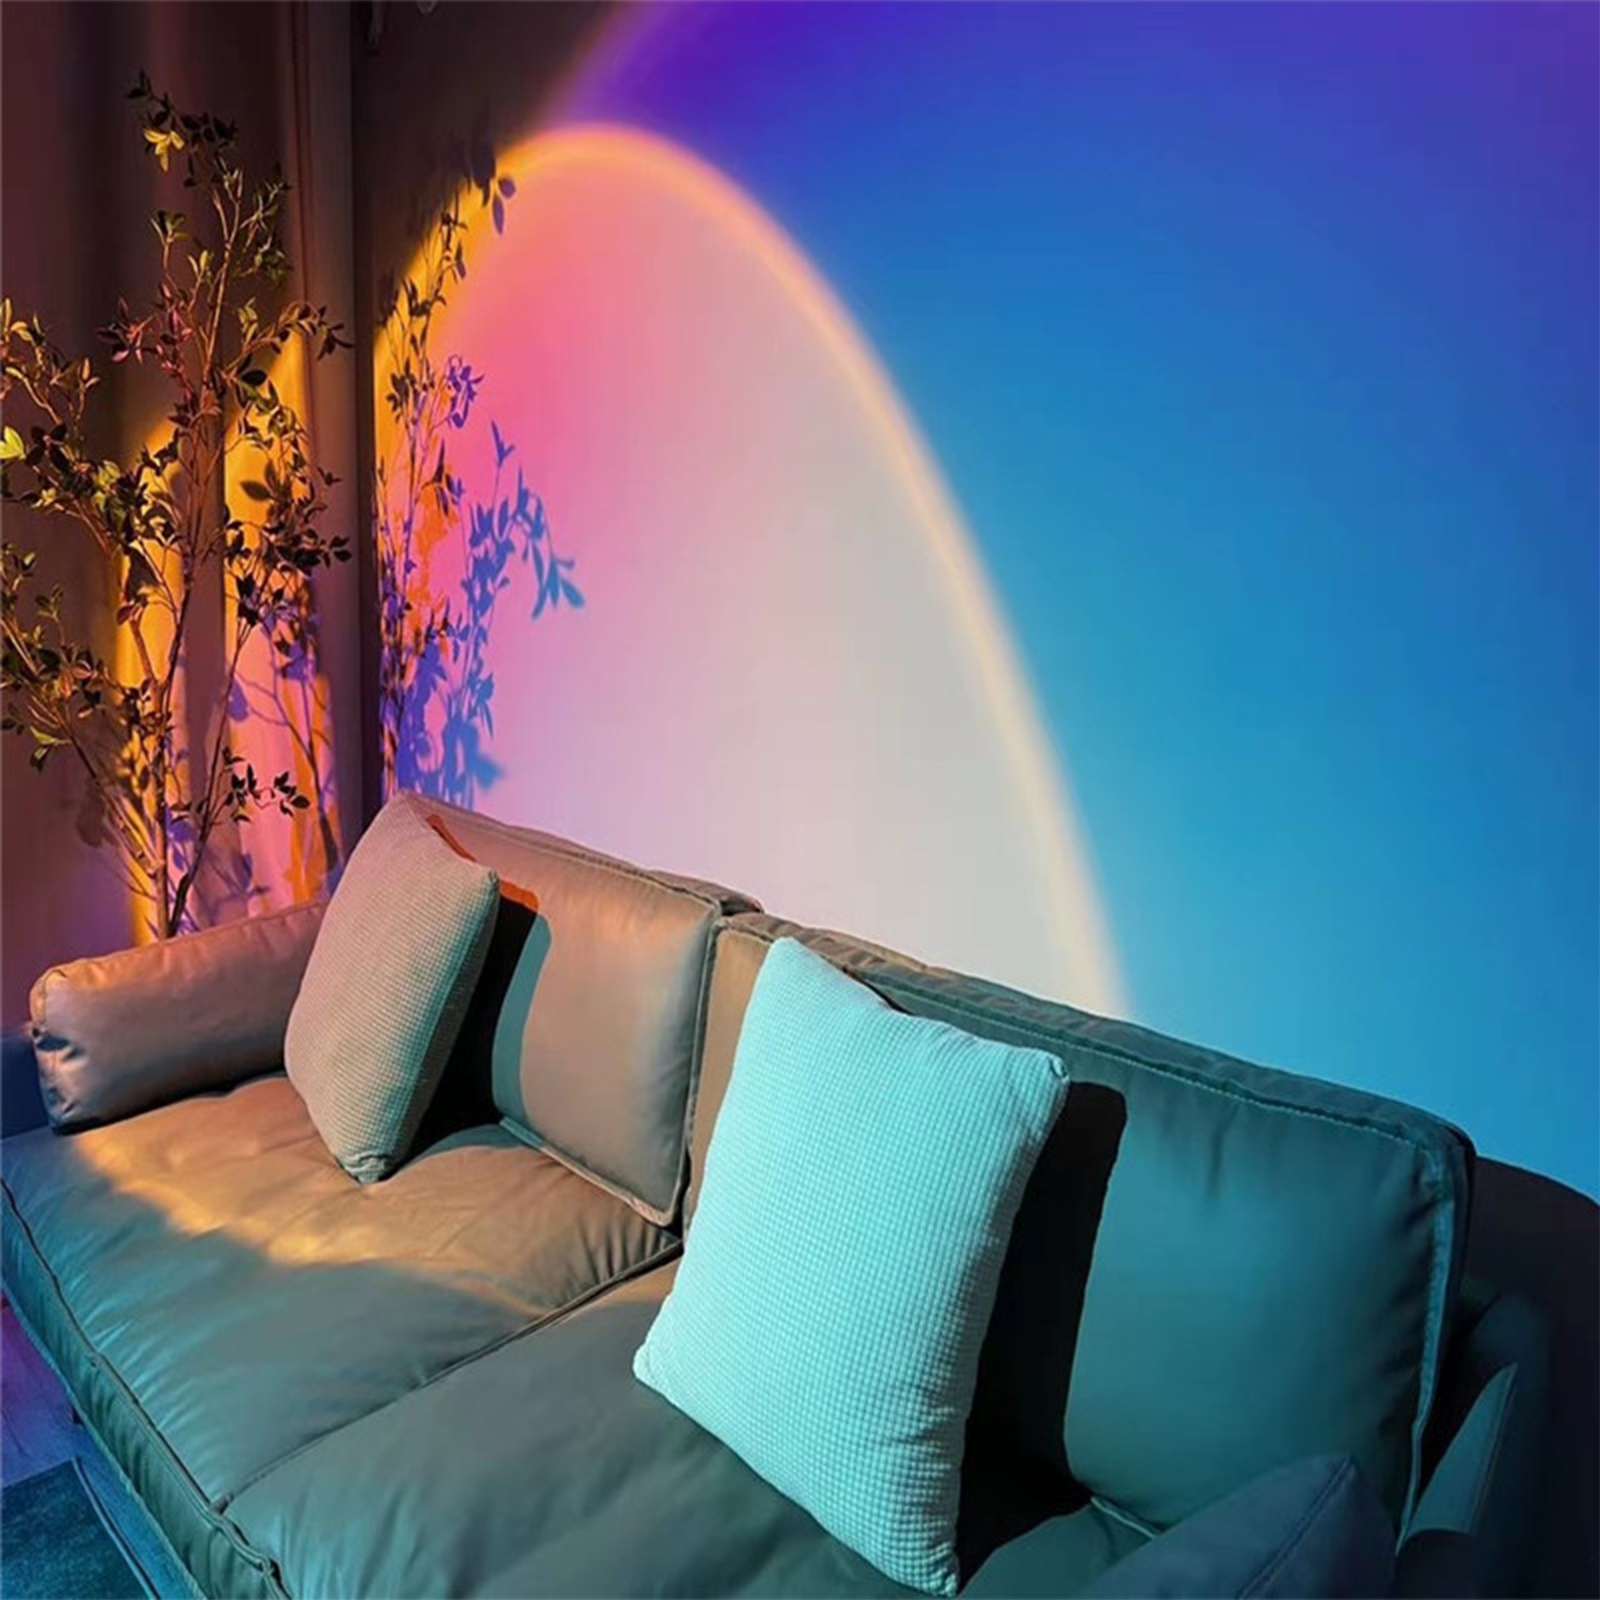 Rainbow Sunset Projection Atmosphere Lamp Colorful Background Night Light от Cesdeals WW